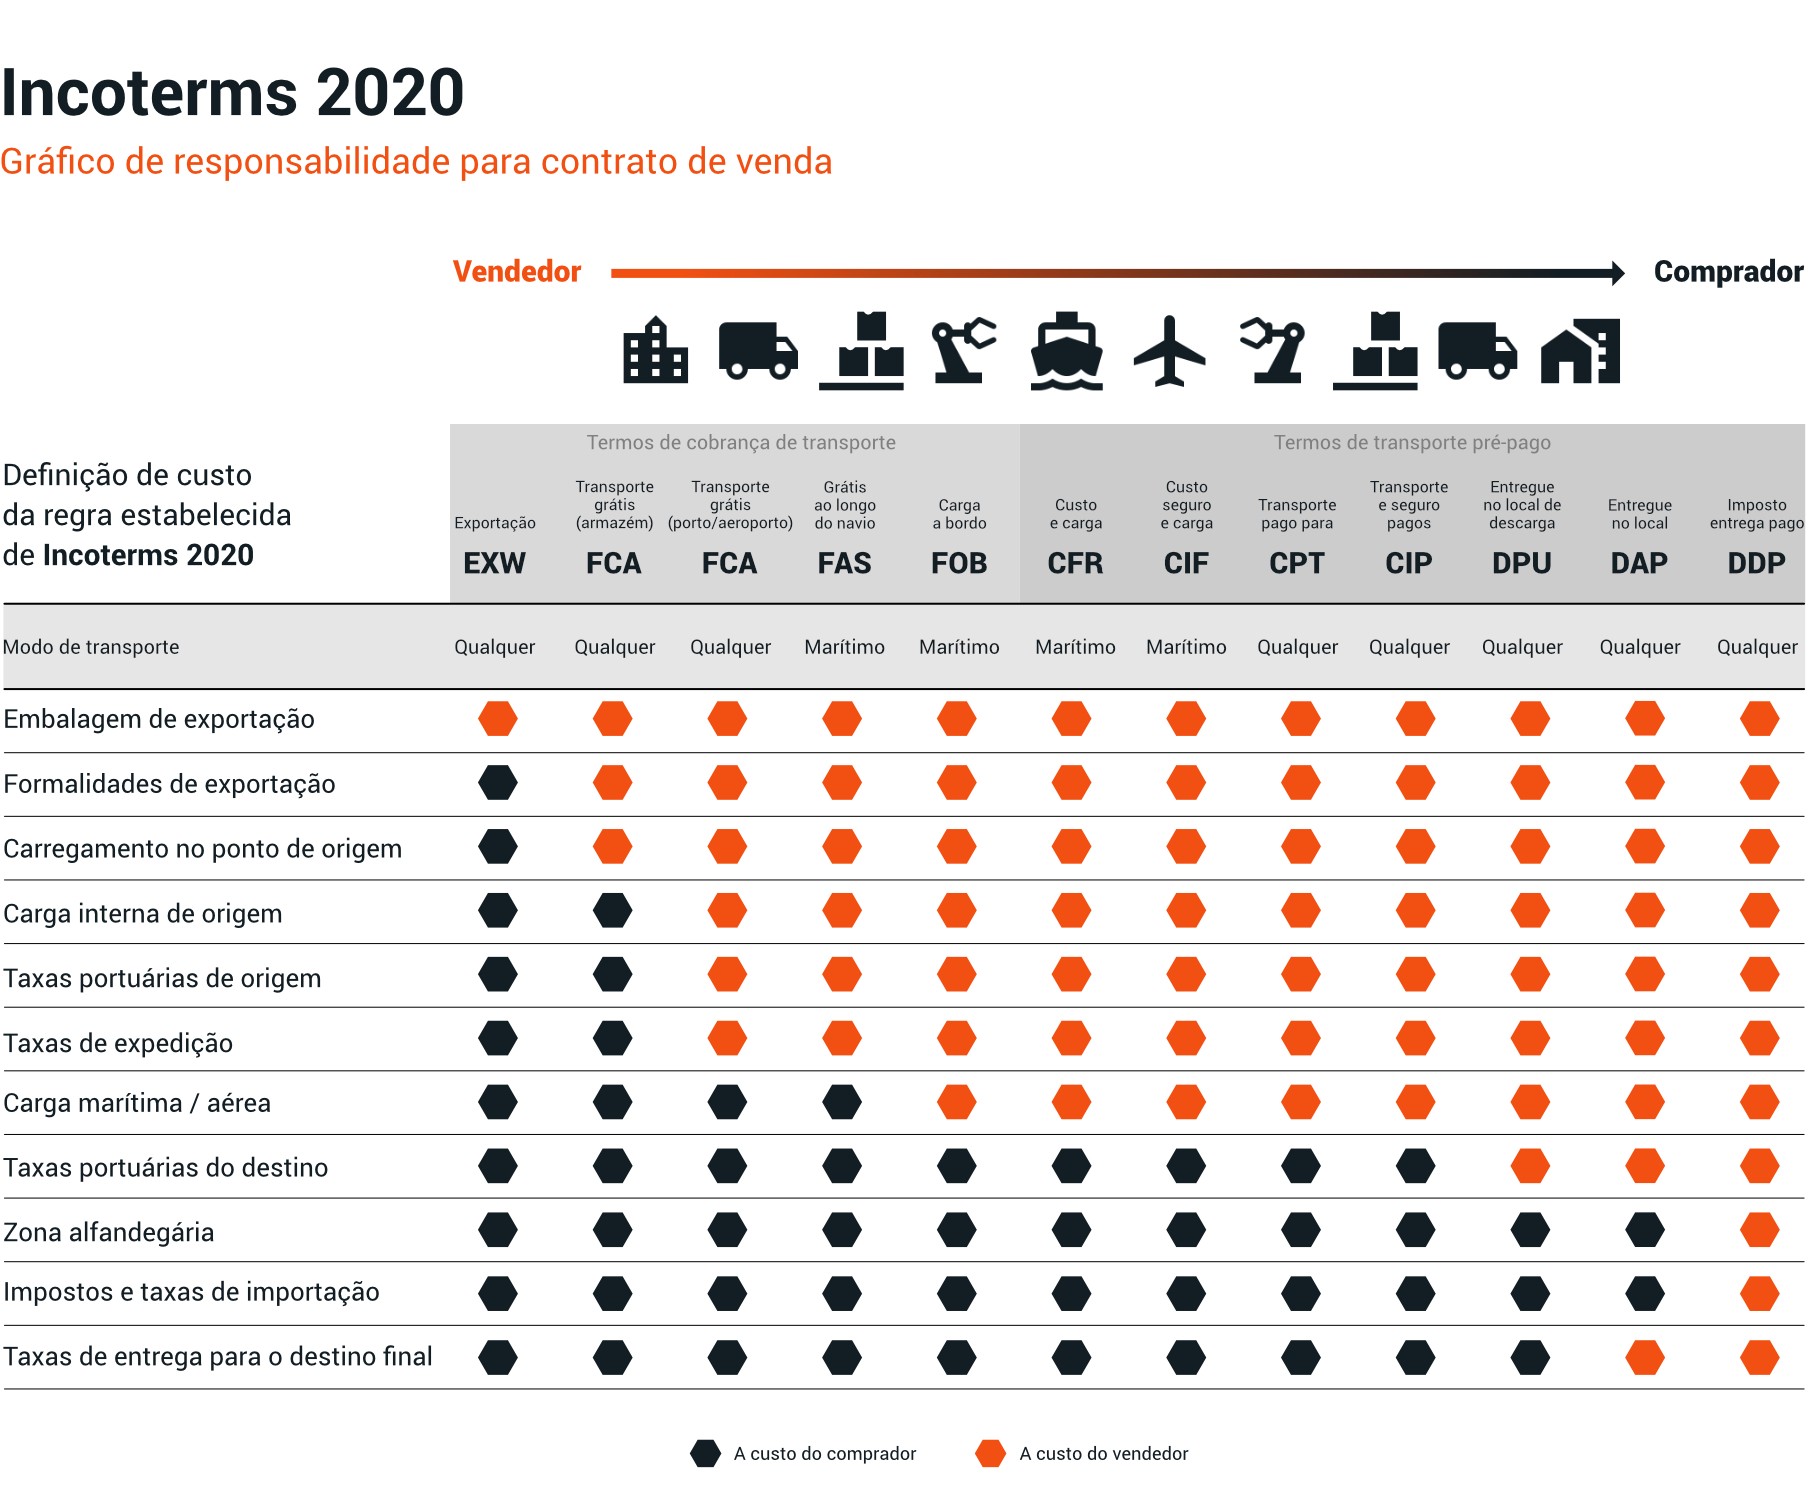 Incoterms 2020 - PARTTEAM & OEMKIOSKS